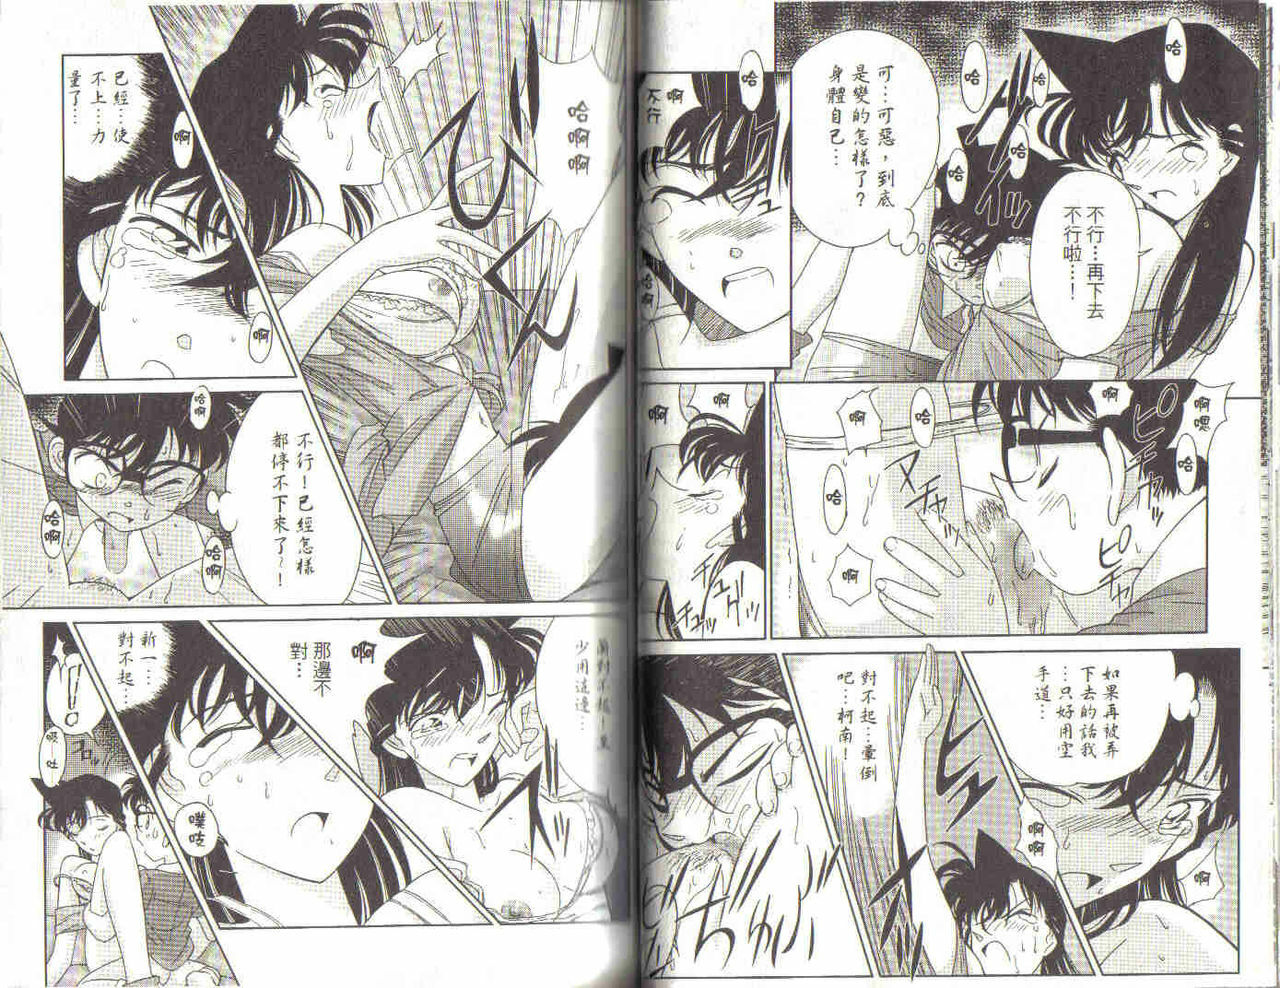 [Ooya Nako] Detective Assistant Vol. 3 (Detective Conan) [Chinese] page 34 full